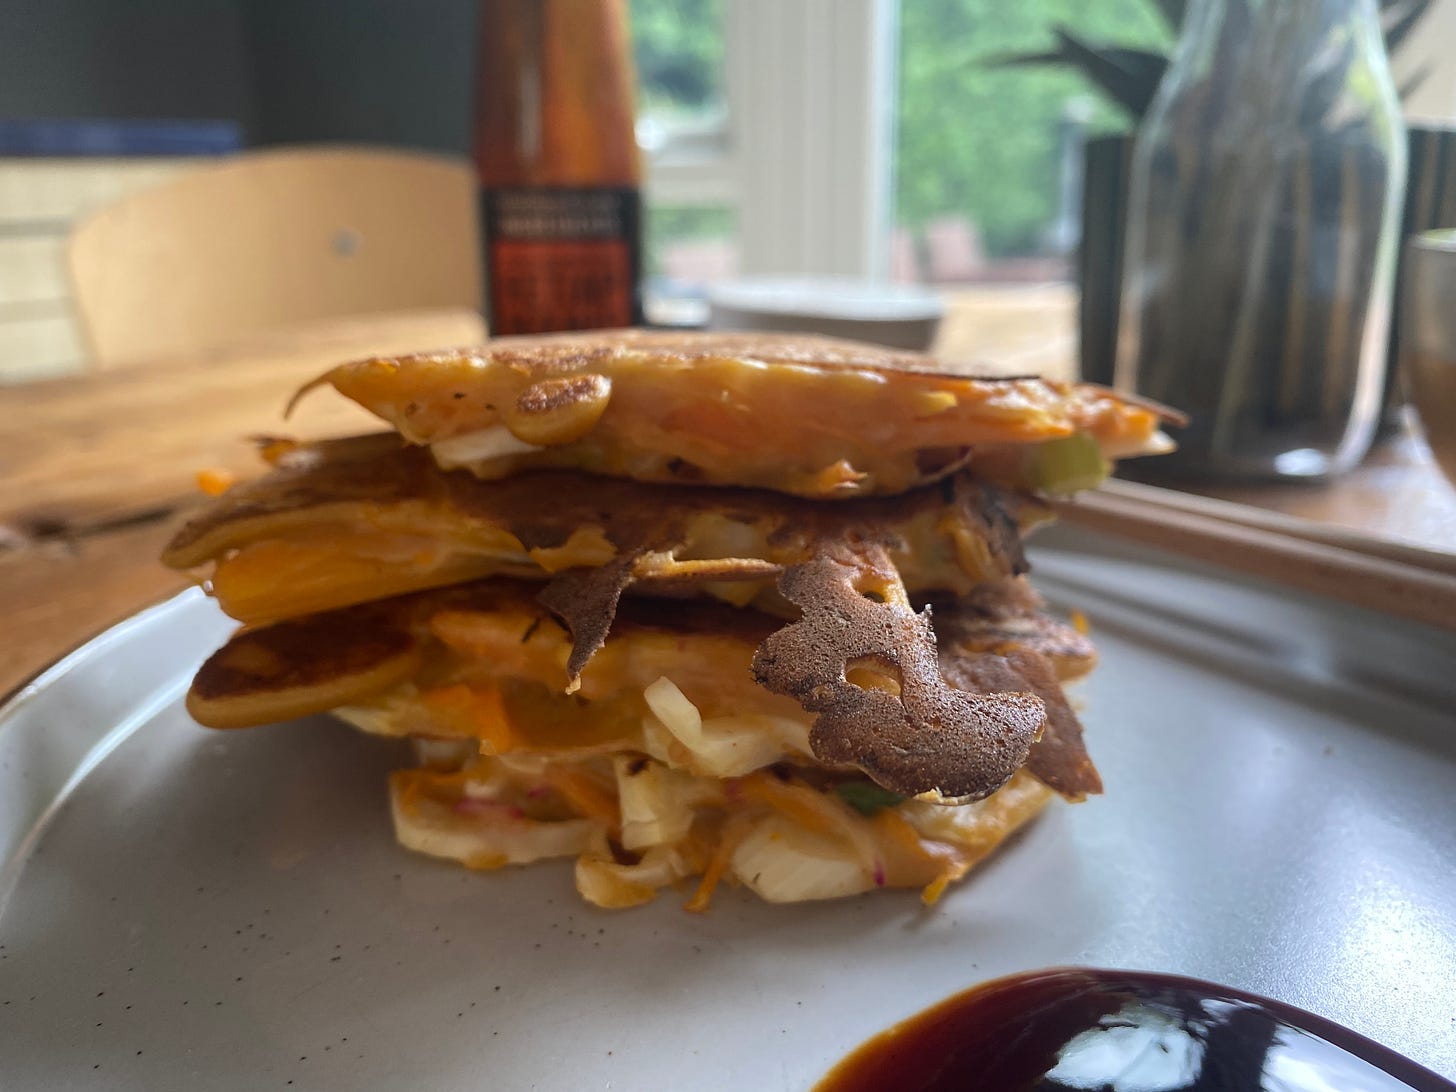 Stack of pancakes on a plate. A bottle of sauce is behind but out of focus